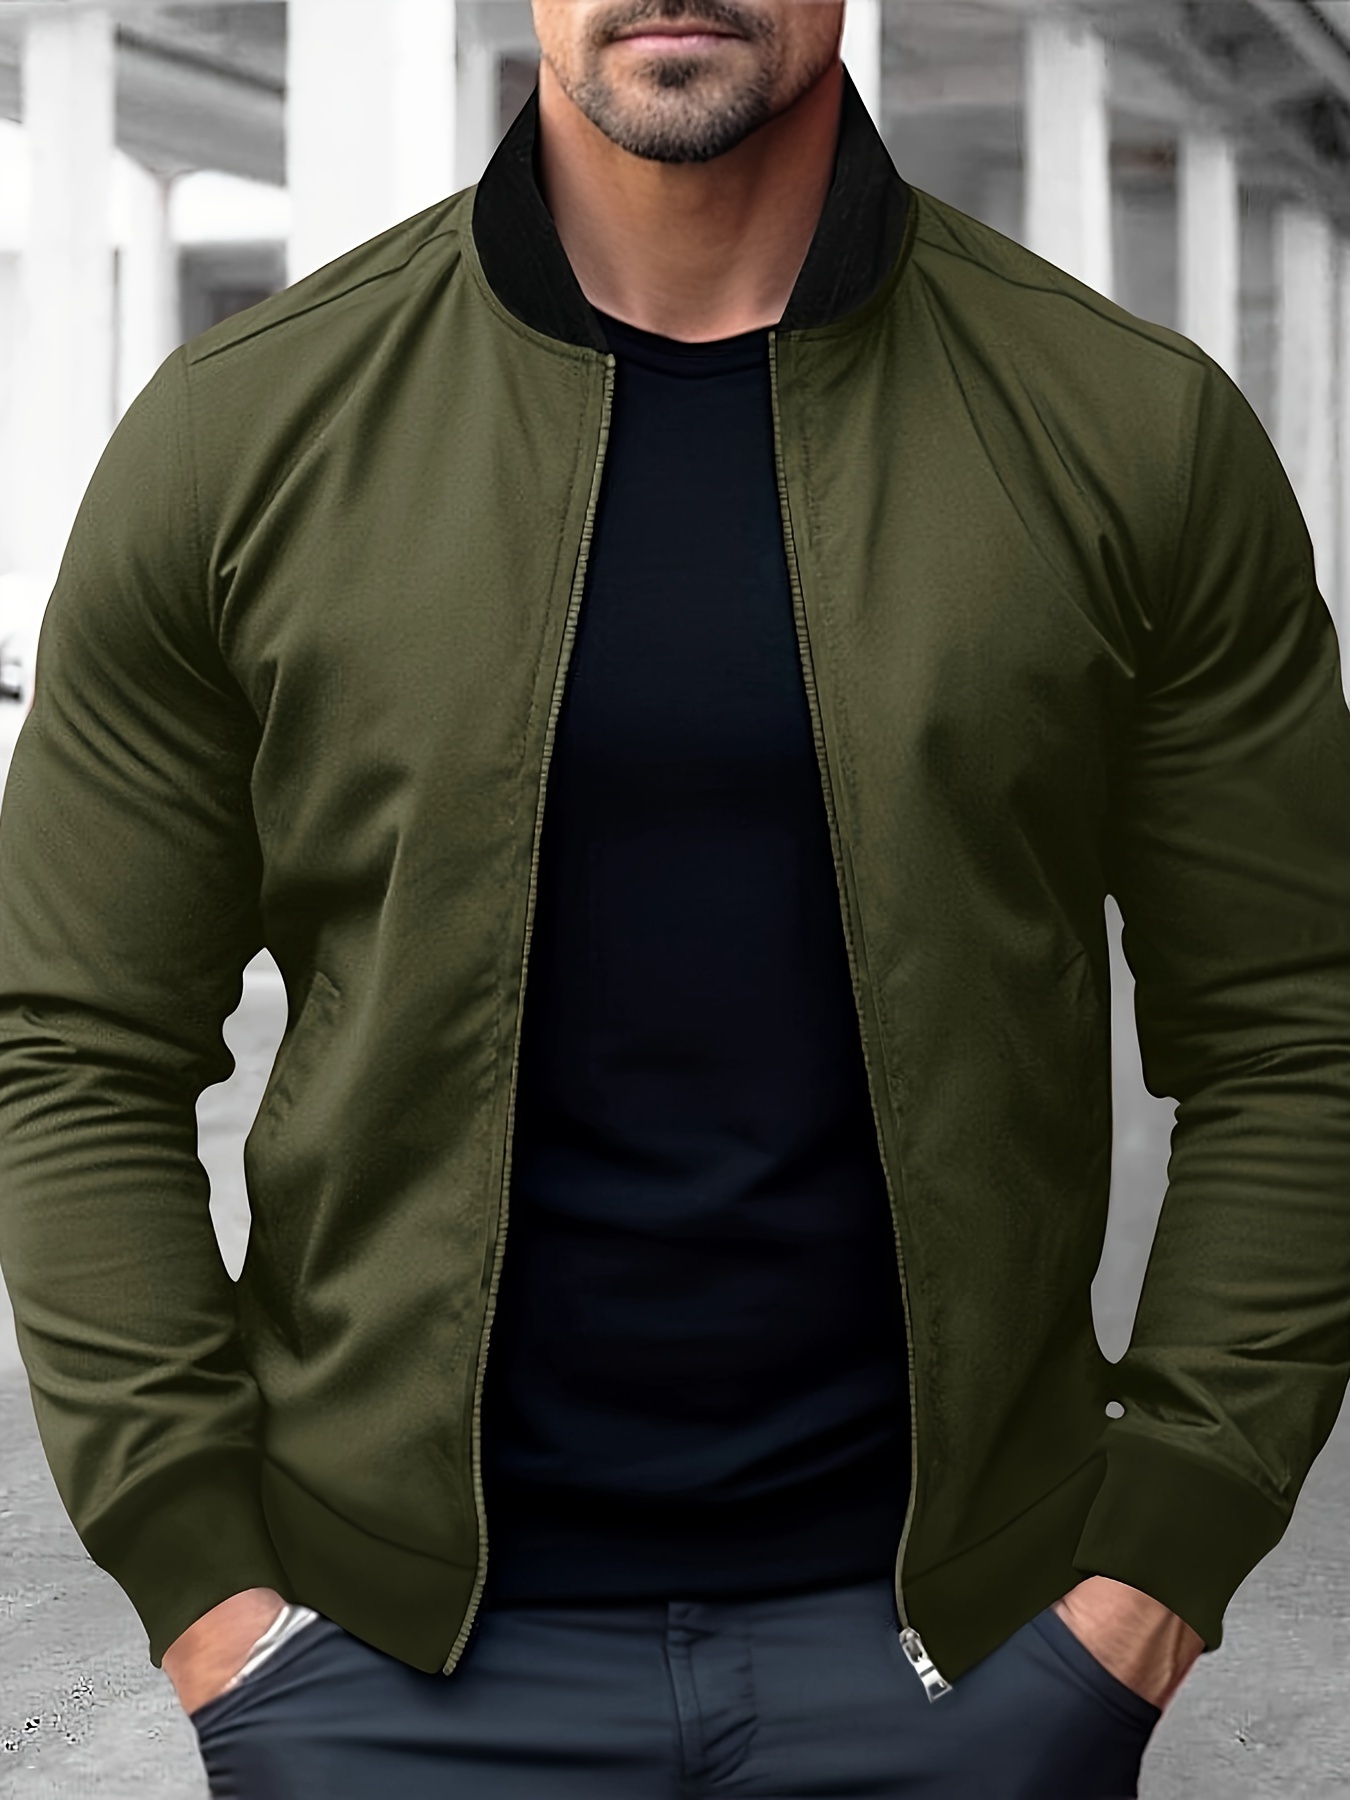 spring and autumn mens stand collar fashion versatile zipper jacket street style coat details 30